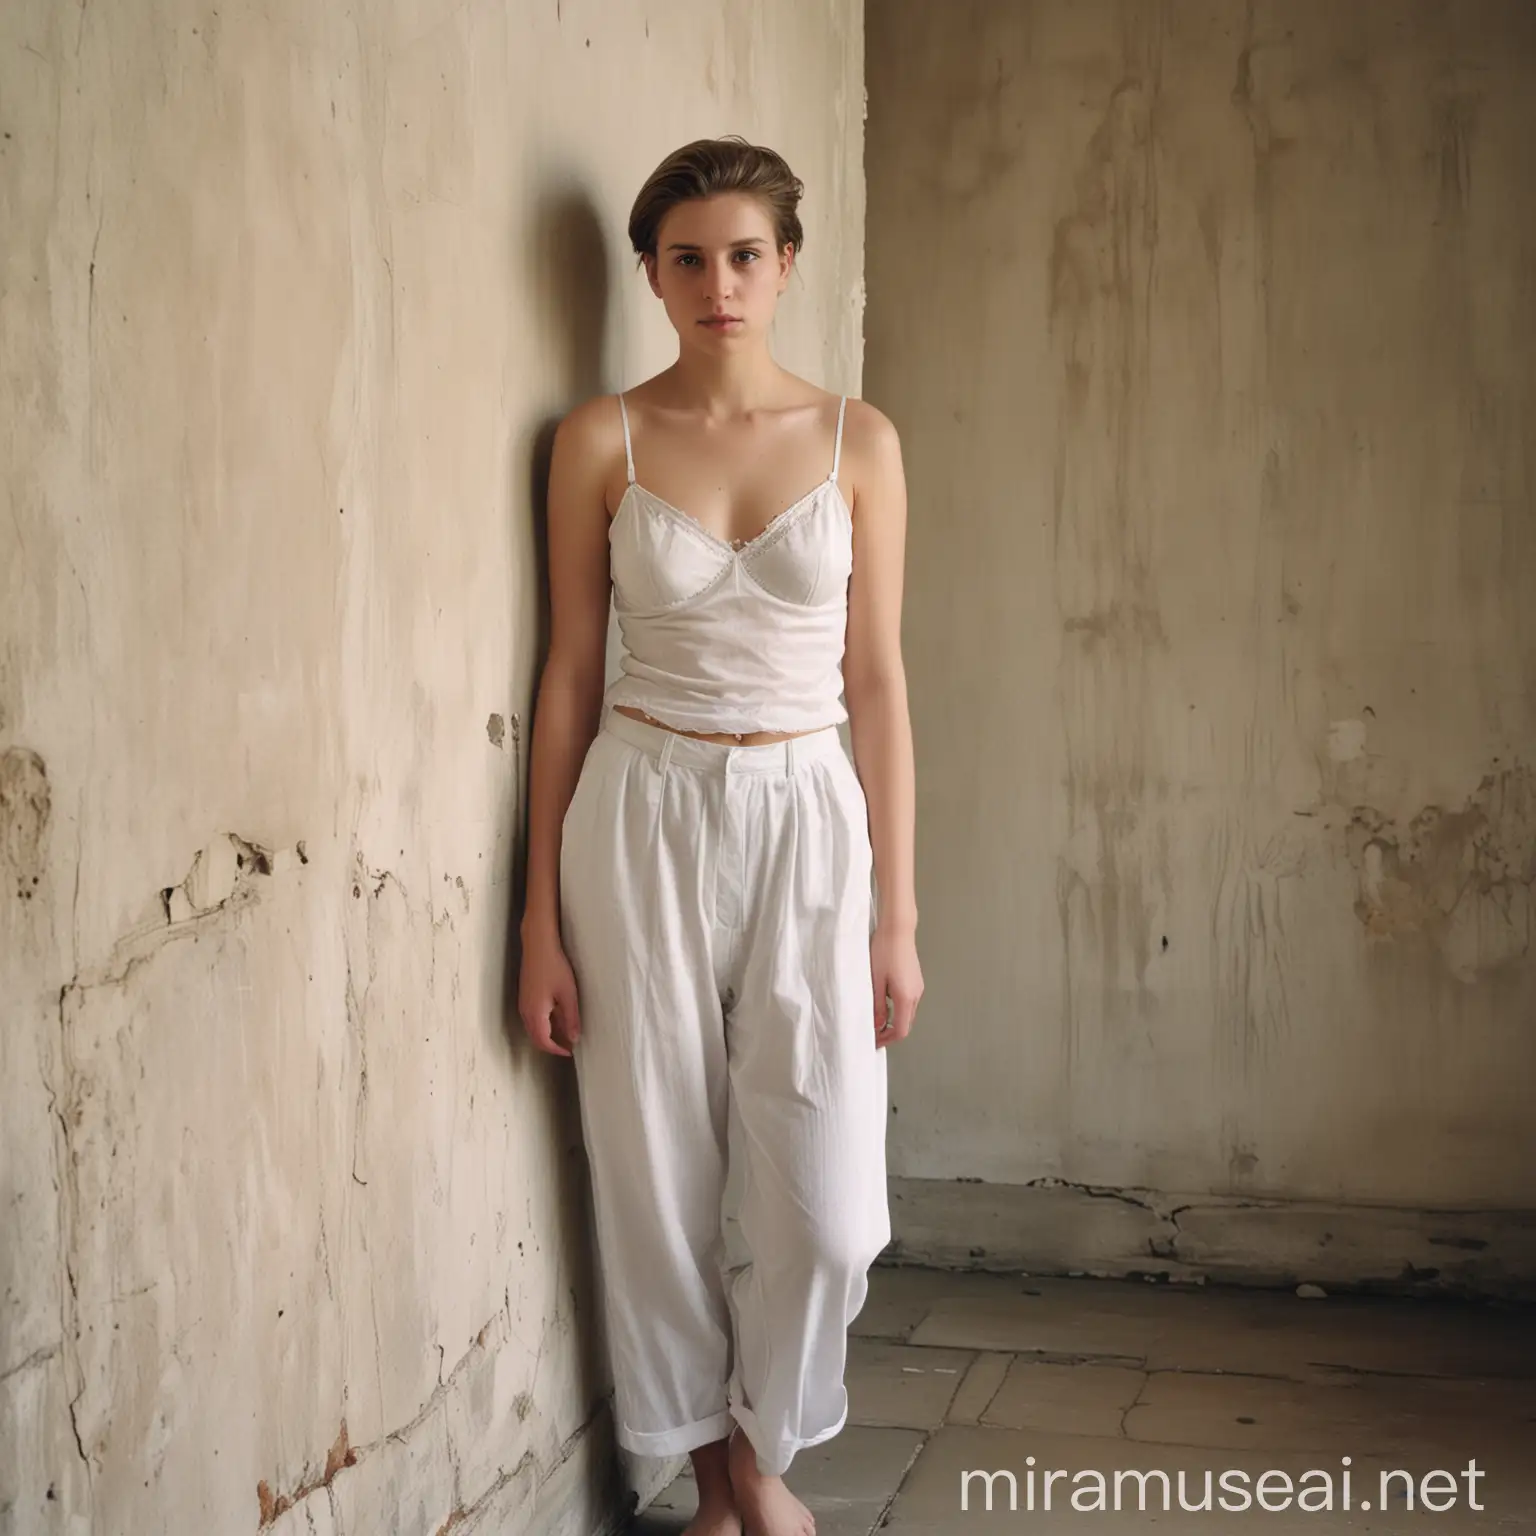 Young Woman in White Lingerie Poses Against Plain Wall in Francesca Woodman Inspired Photograph